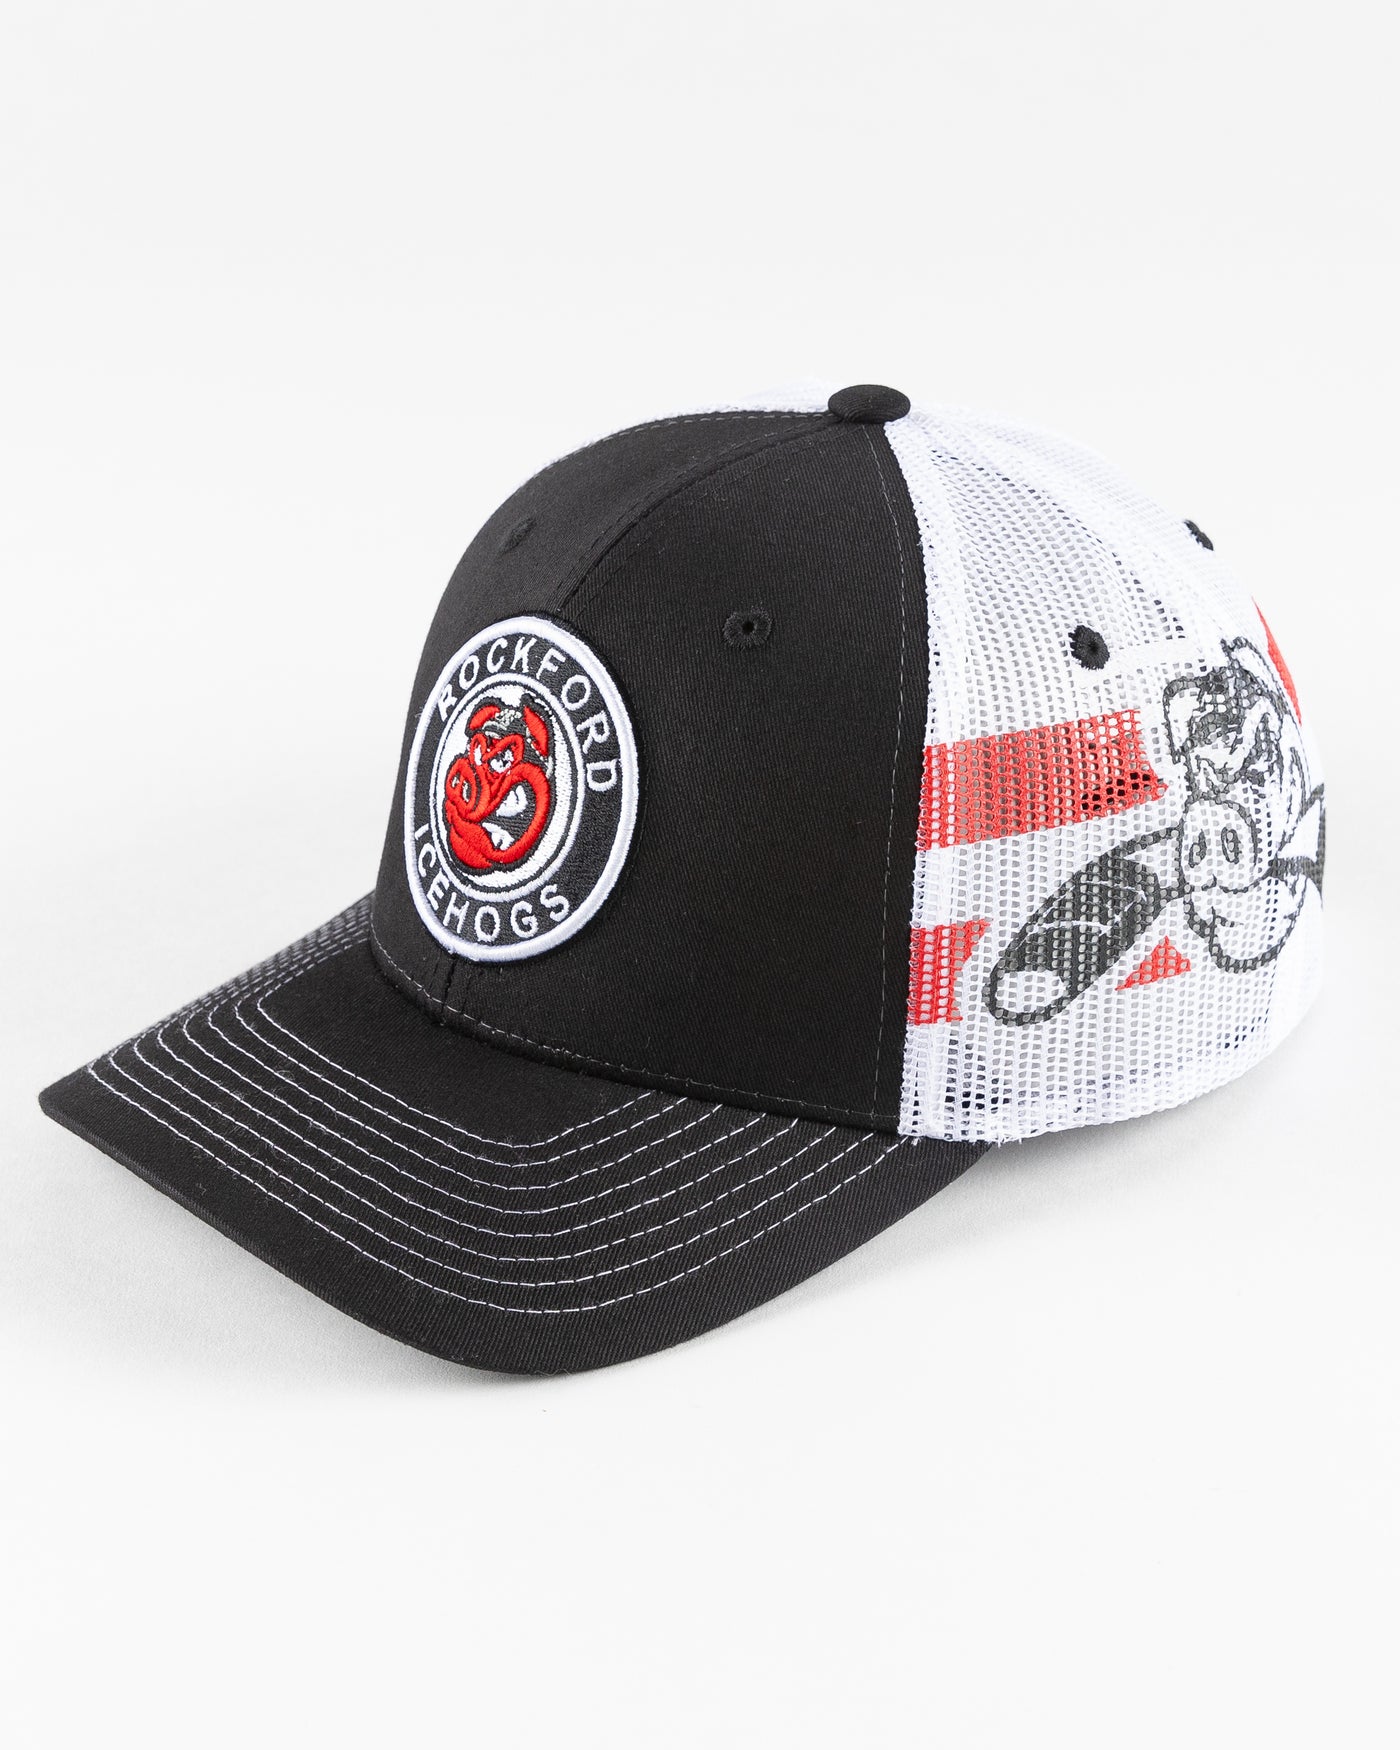 Rockford IceHogs black and white trucker with embroidered patch on front - left angle lay flat